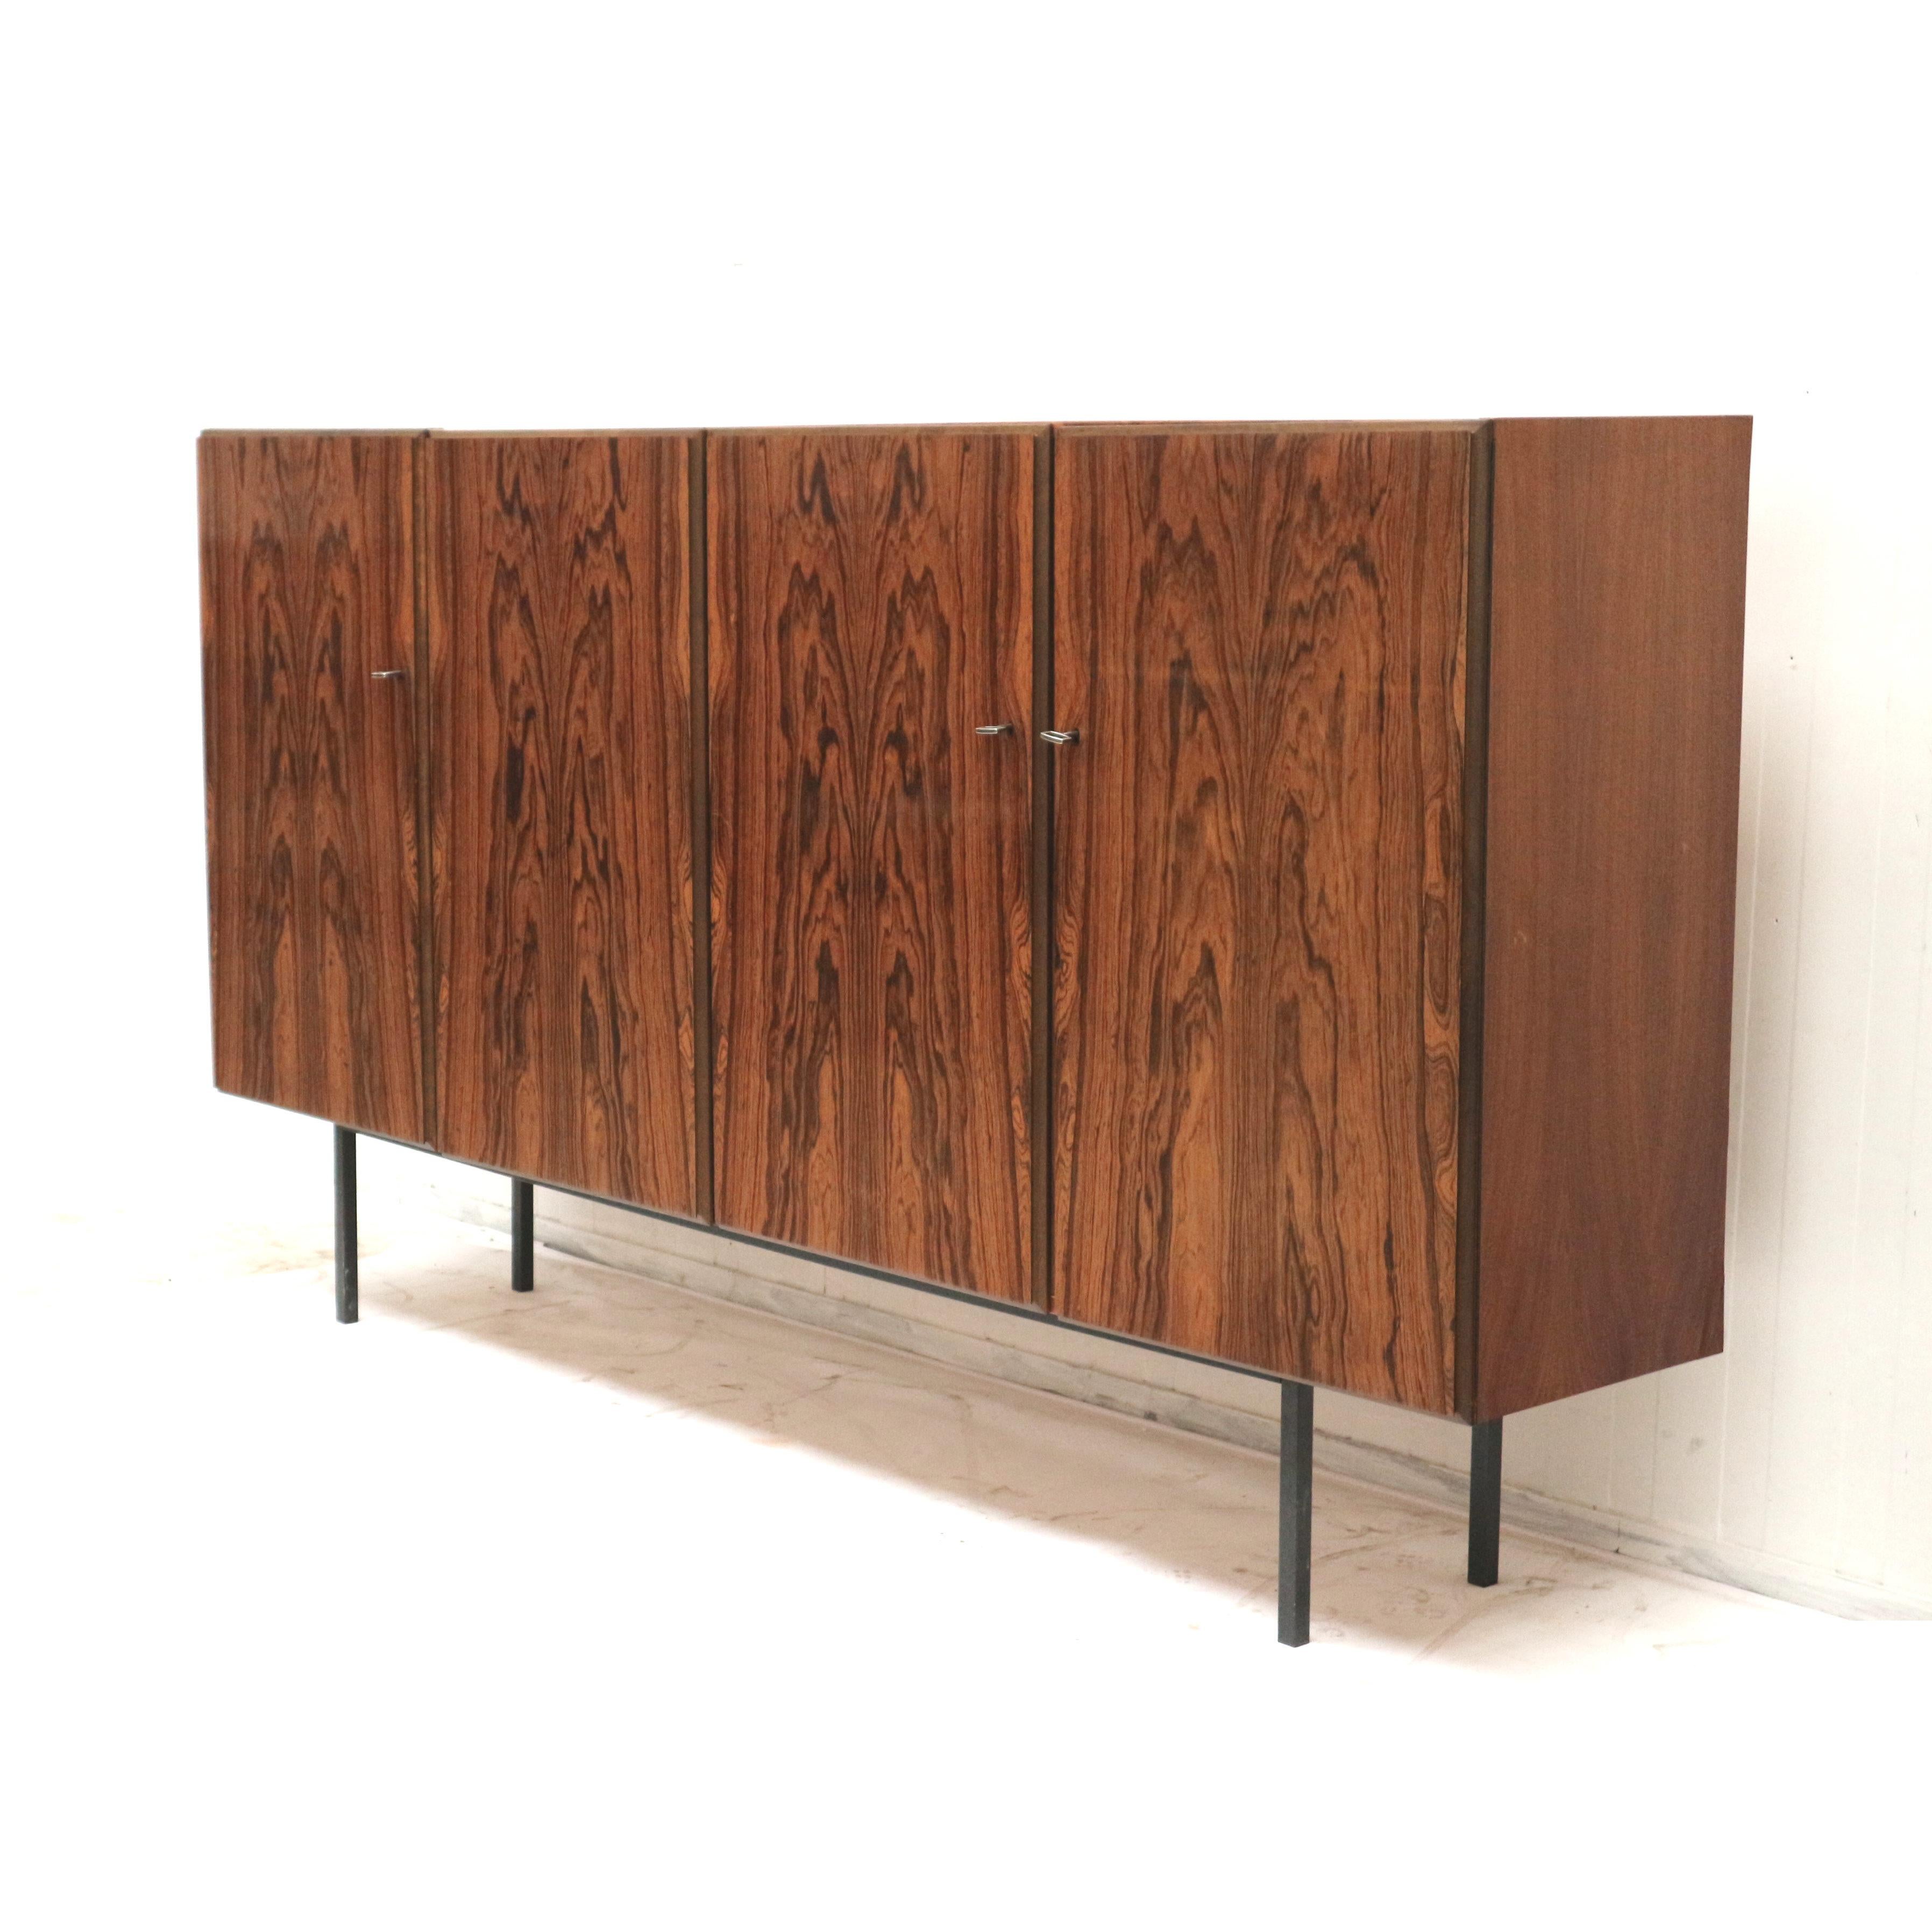 Large vintage rosewood sideboard / highboard made in the 60.

Dimensions:
Width: 240 cm
Height: 132 cm
Depth: 44 cm

The sideboard has traces of use matching the age of the cabinet.